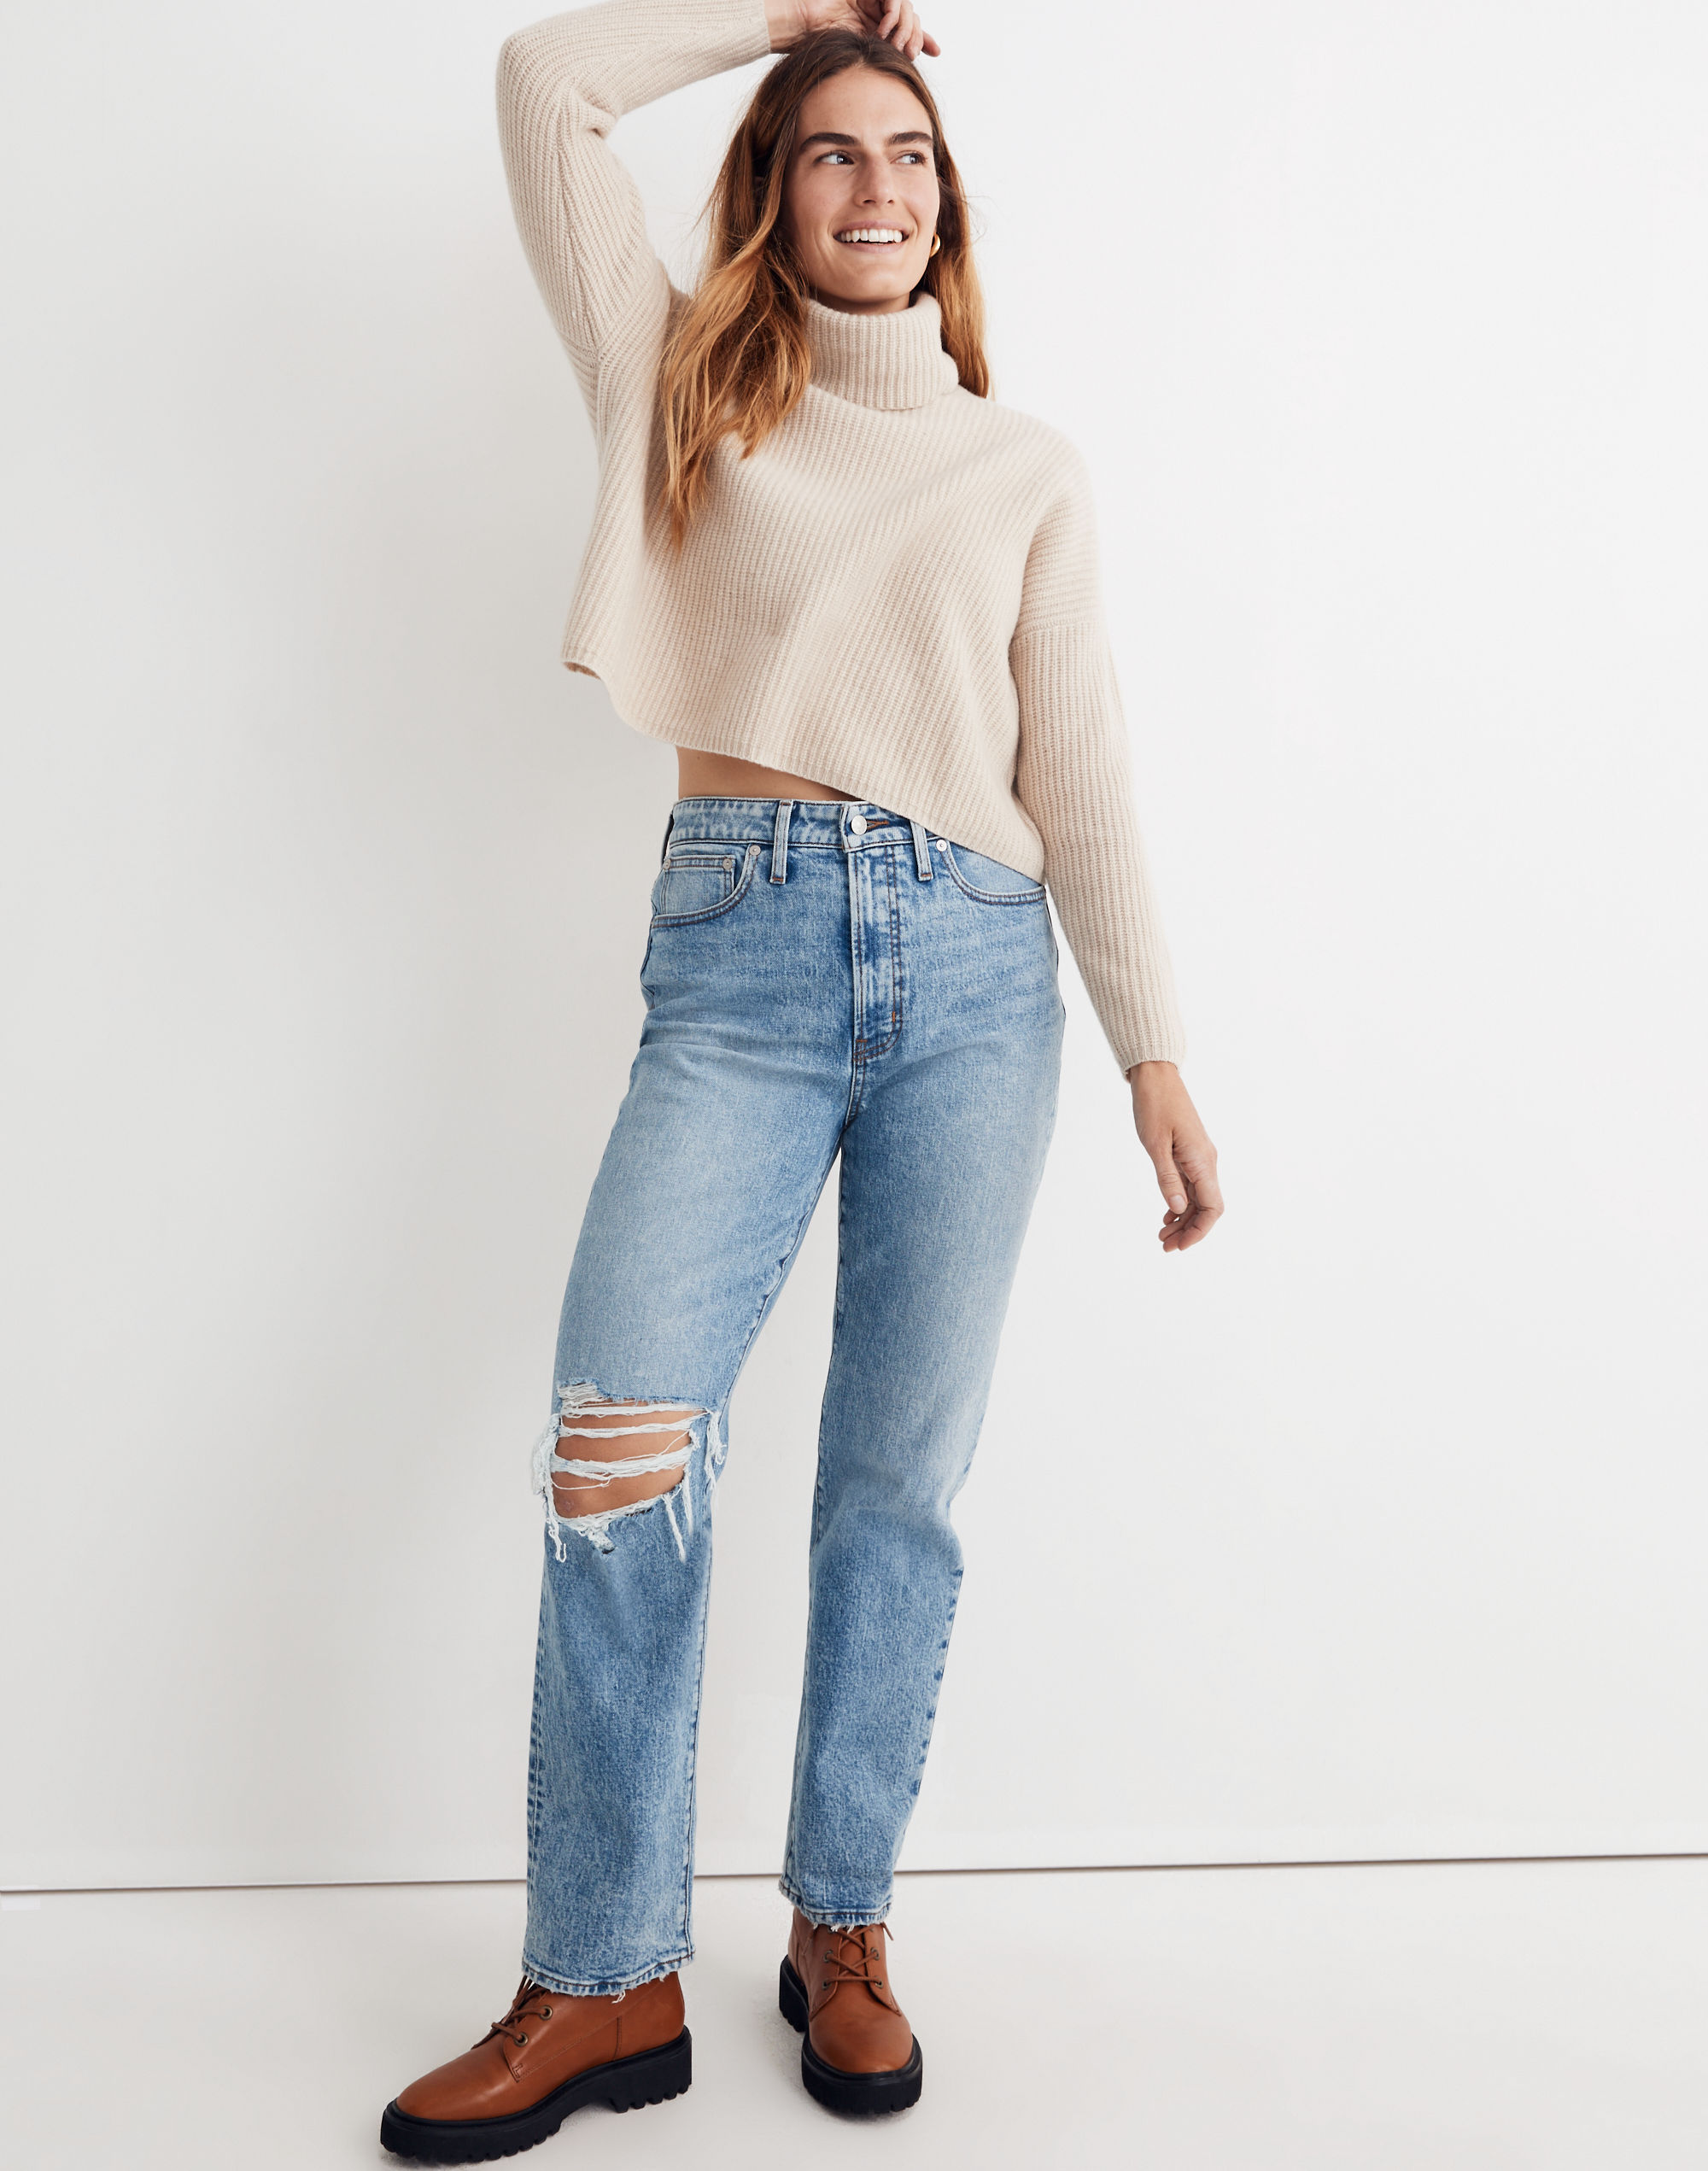 The Petite Perfect Vintage Jean in Decatur Wash